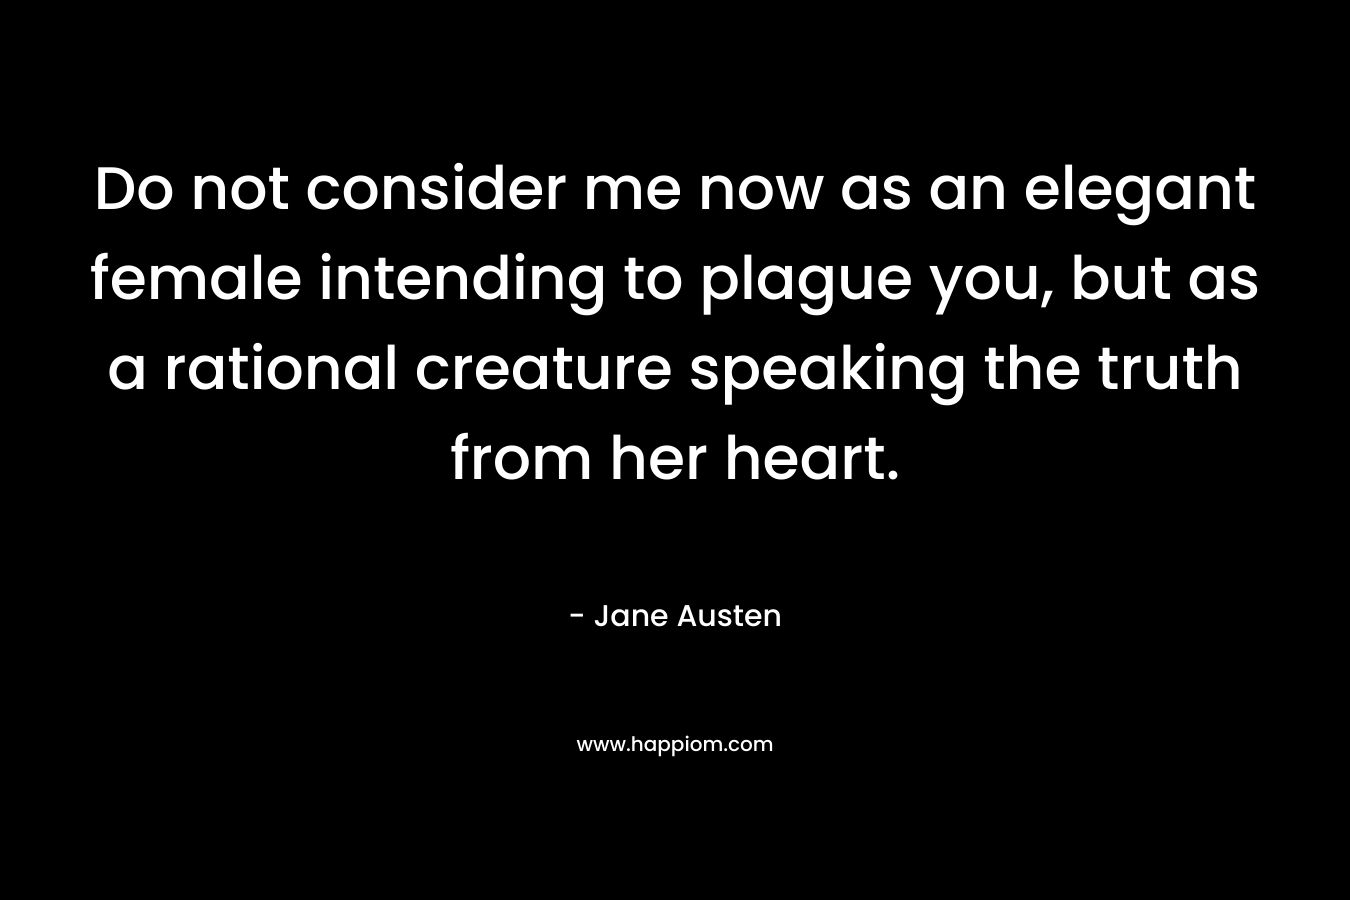 Do not consider me now as an elegant female intending to plague you, but as a rational creature speaking the truth from her heart. – Jane Austen